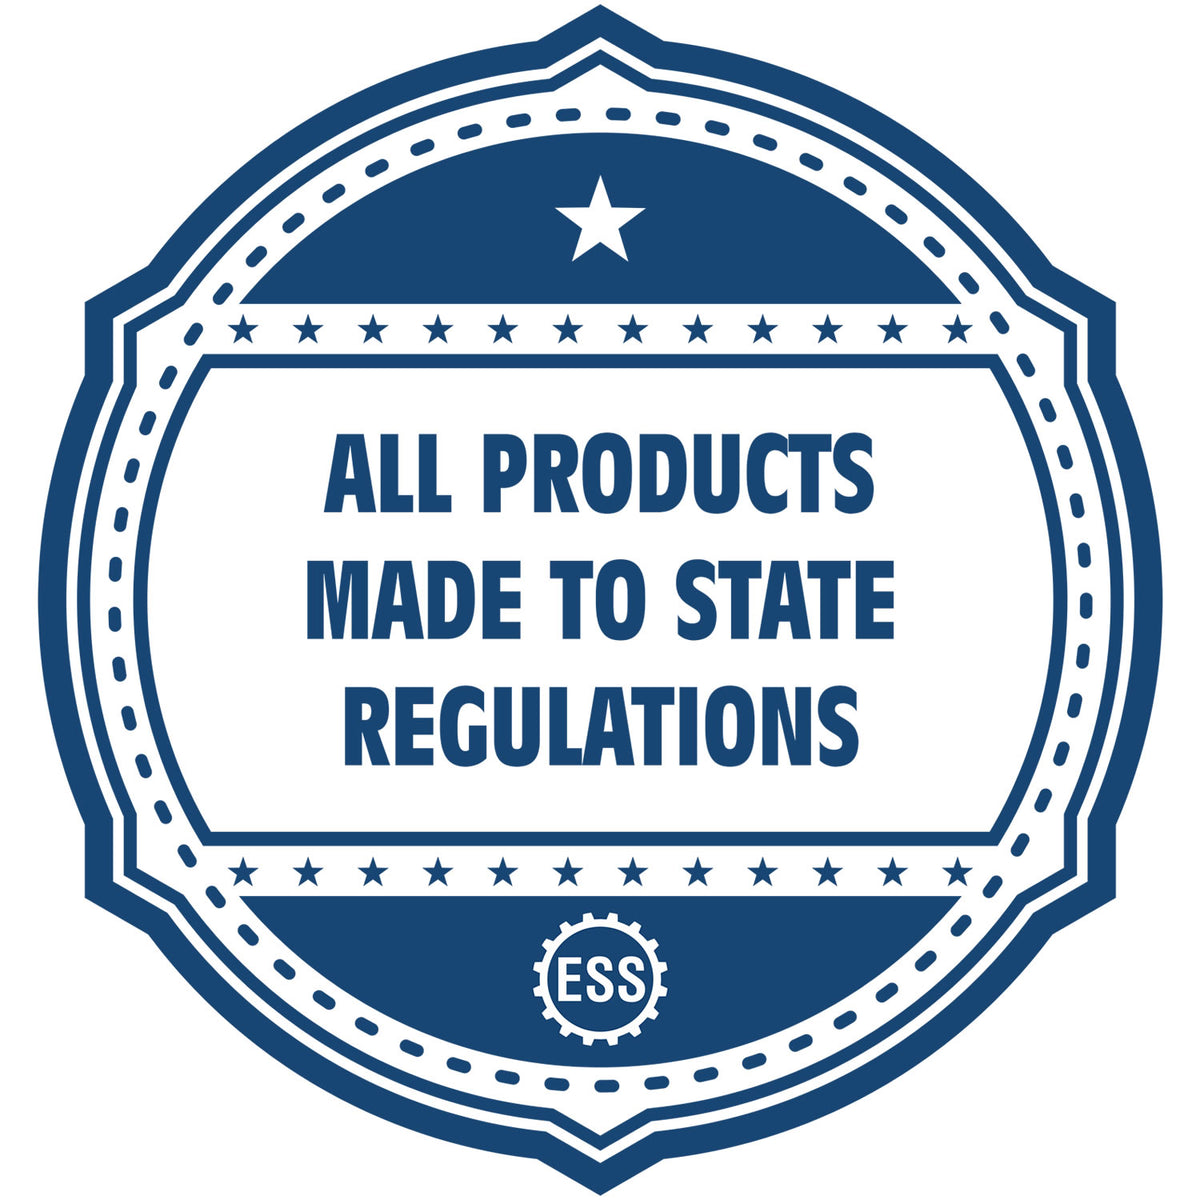 An icon or badge element for the State of Utah Architectural Seal Embosser showing that this product is made in compliance with state regulations.